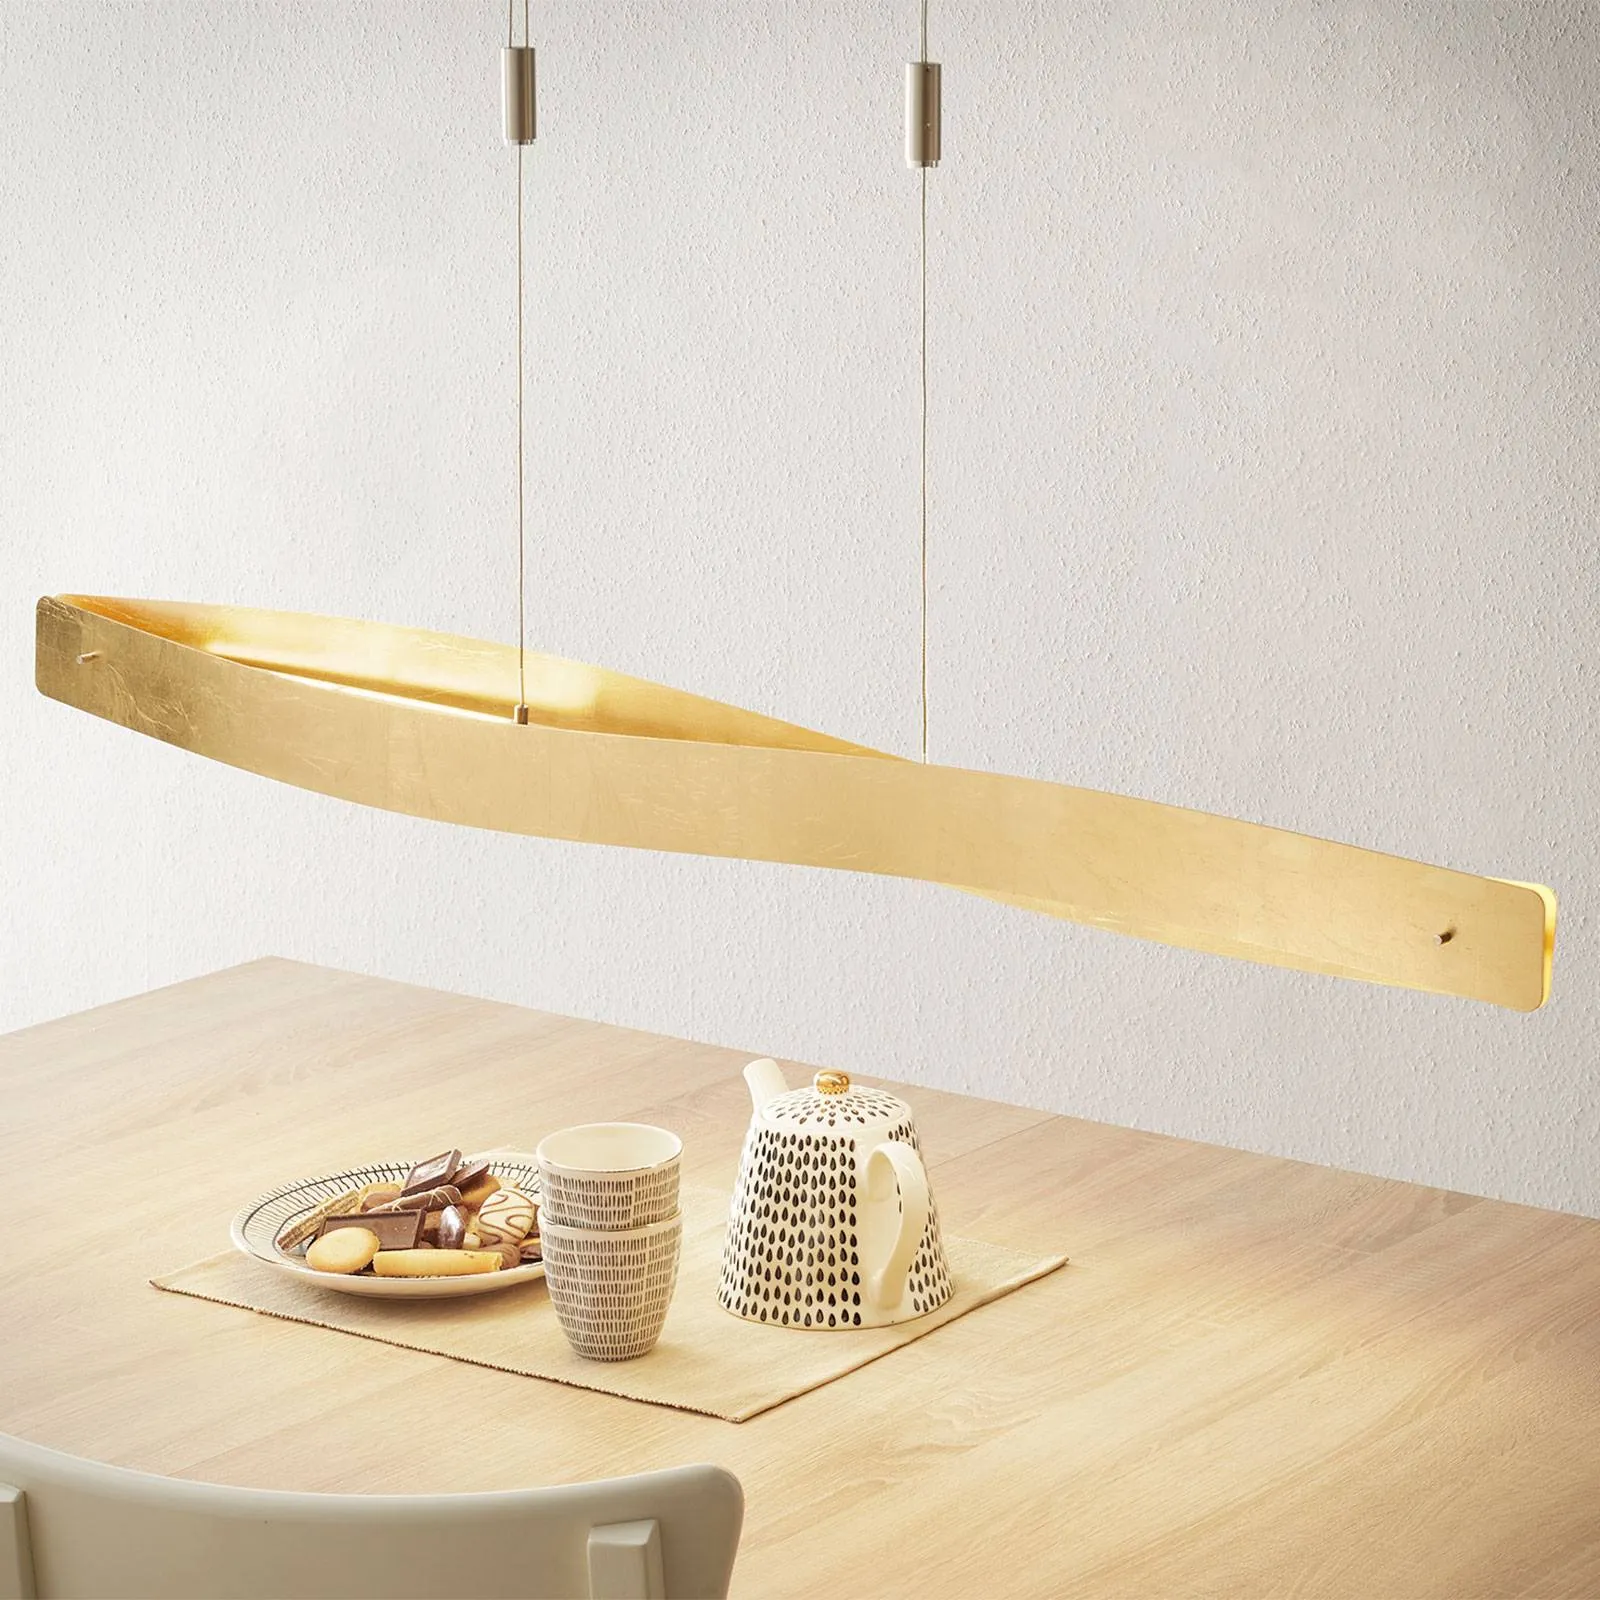 Curved LED hanging light Lian with a golden look